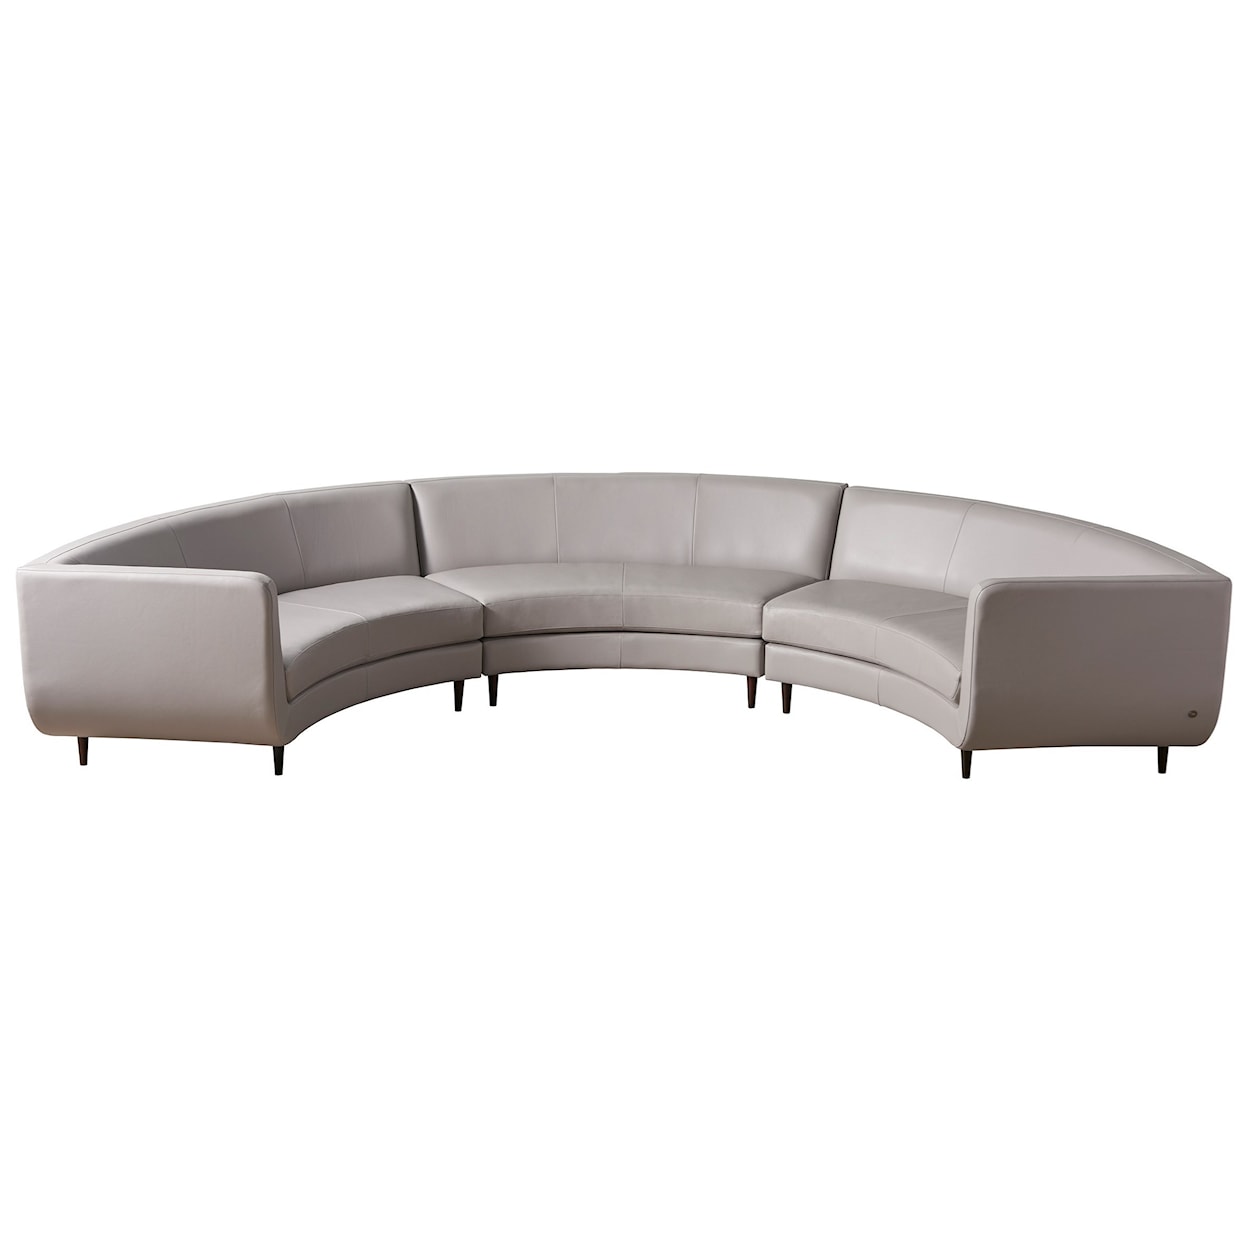 American Leather Menlo Park 6-Seat Sectional Sofa